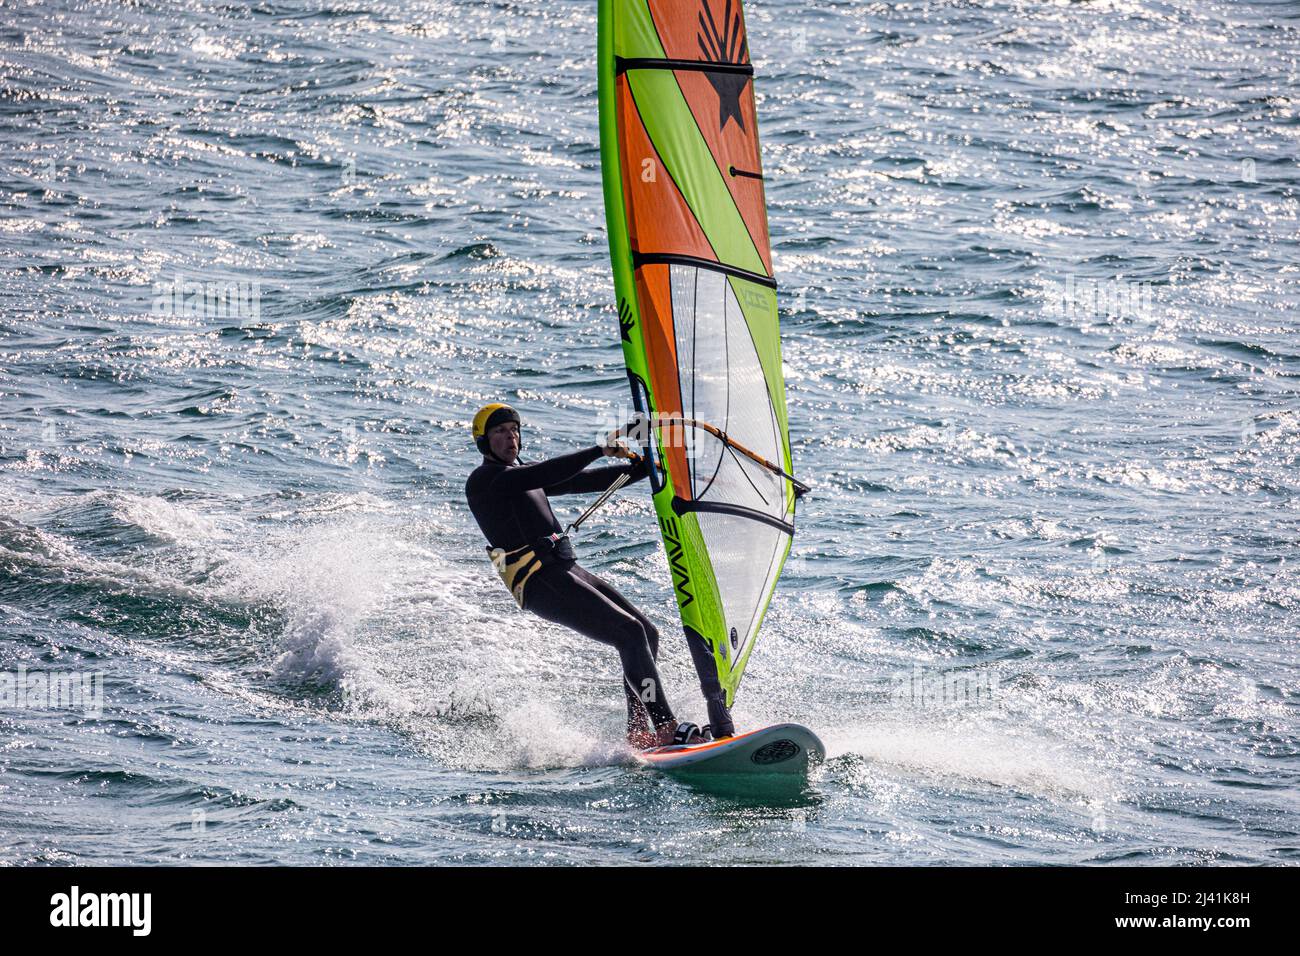 Windsurfer enjoying a fresh westerly wind on Mounts Bay, Cornwall - photographed from public space Stock Photo